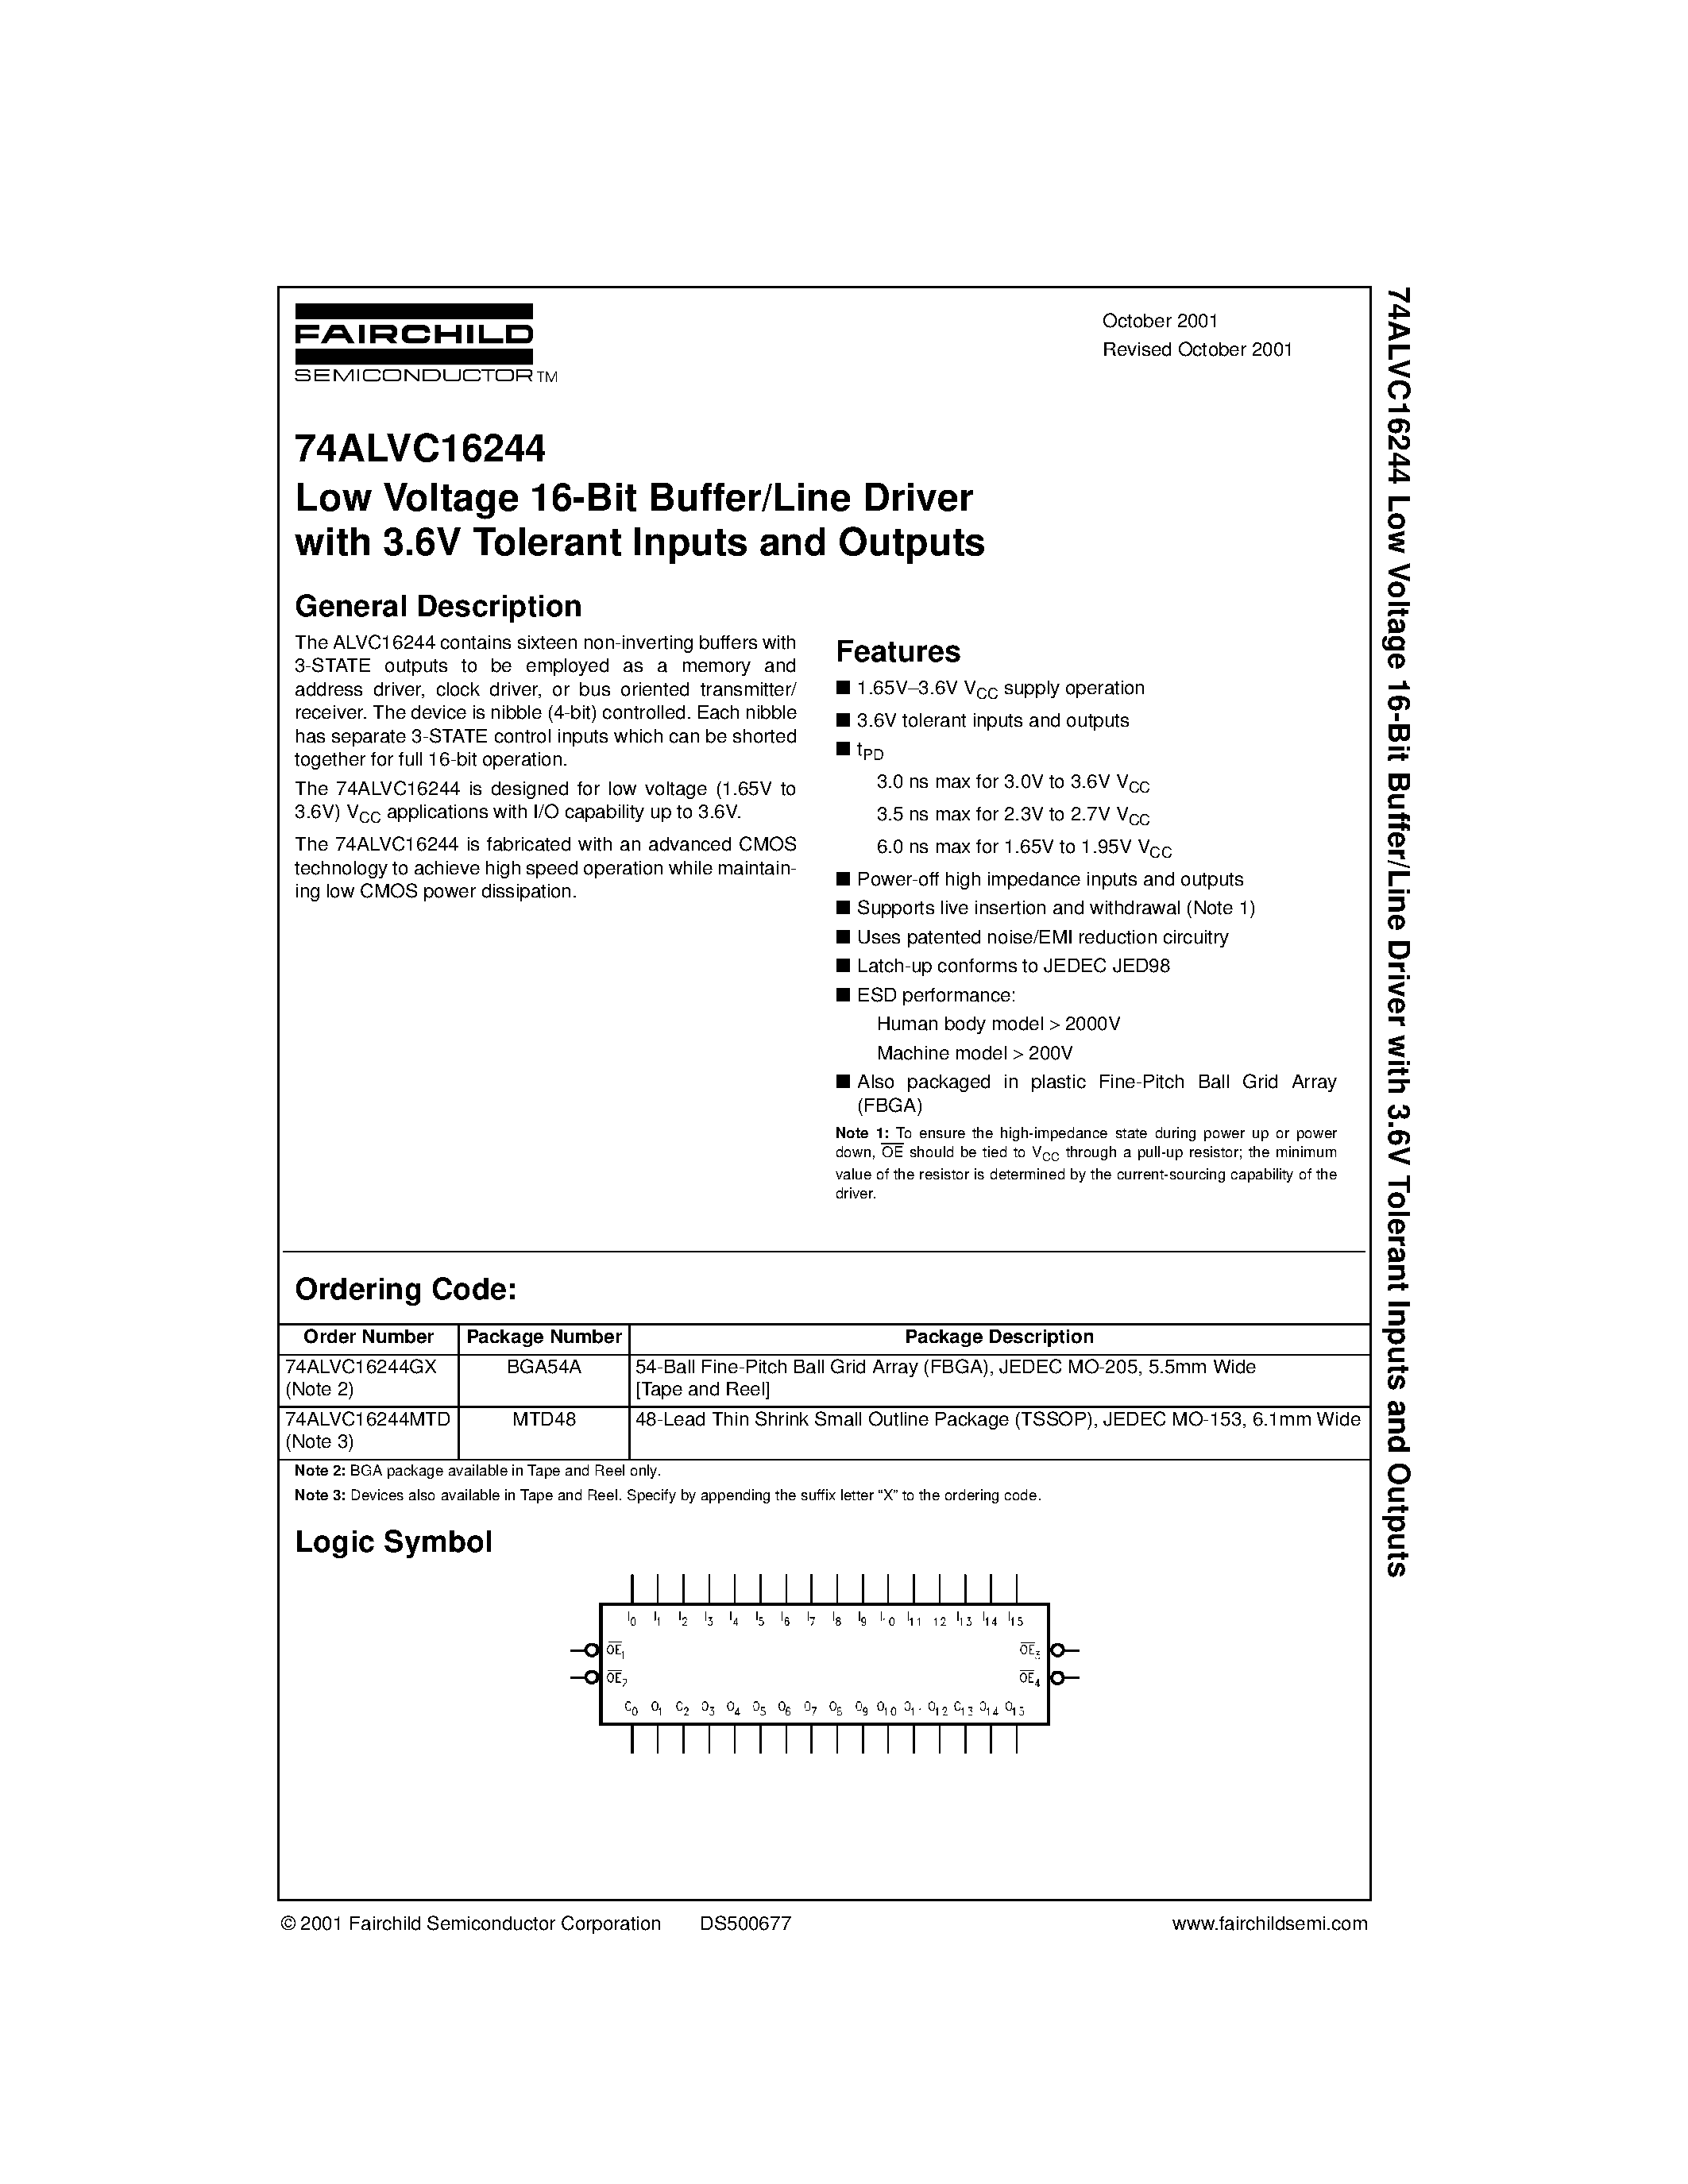 Datasheet 74ALVC16244MTD - Low Voltage 16-Bit Buffer/Line Driver with 3.6V Tolerant Inputs and Outputs page 1